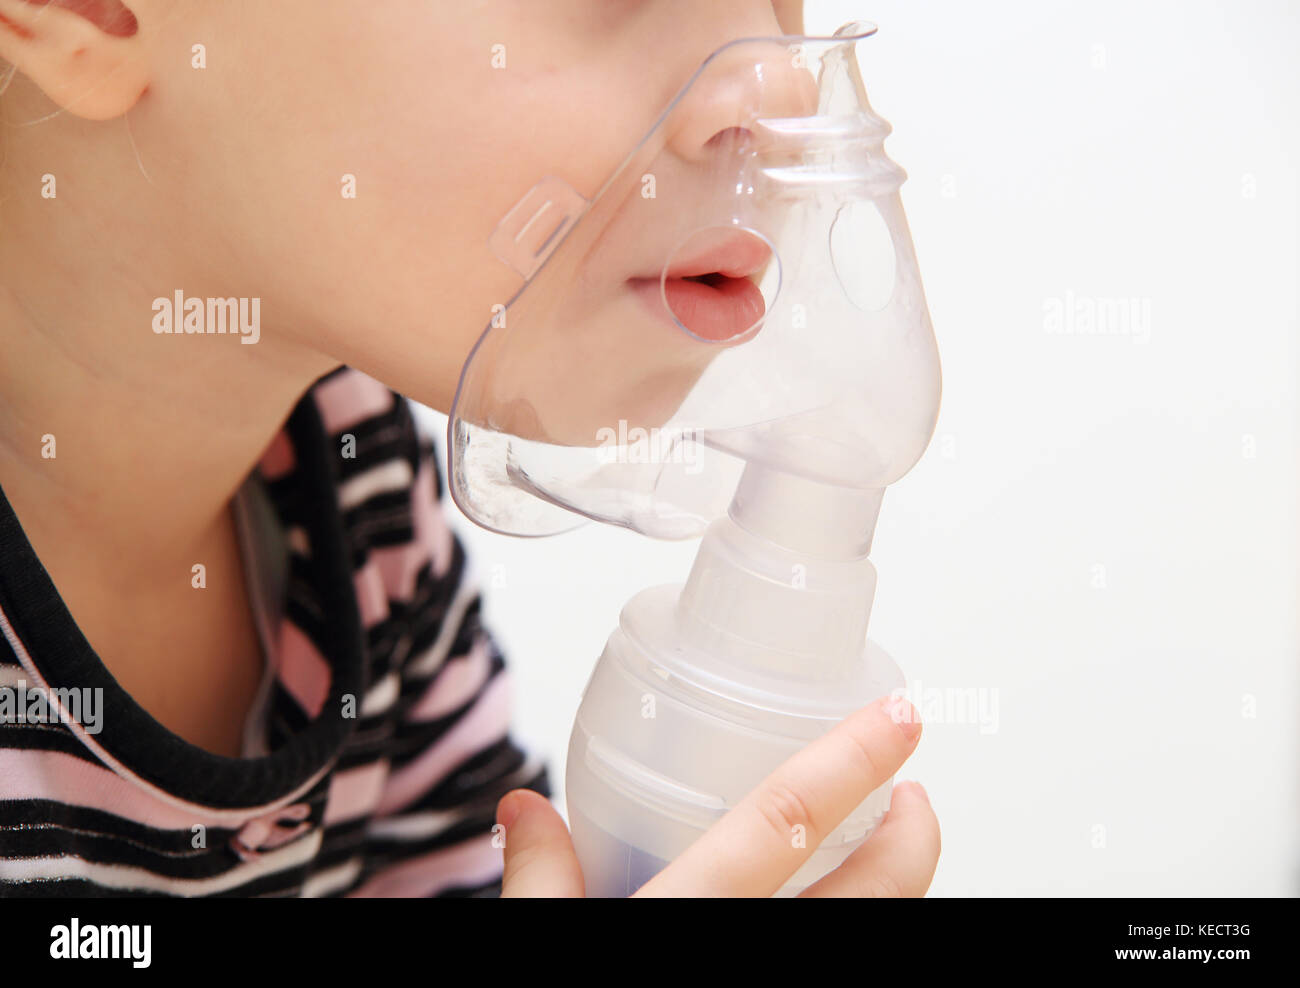 Kid with inhaler isolated on white background. Child holds inhaler mask close-up. Concept of treatment of children's respiratory diseases Stock Photo